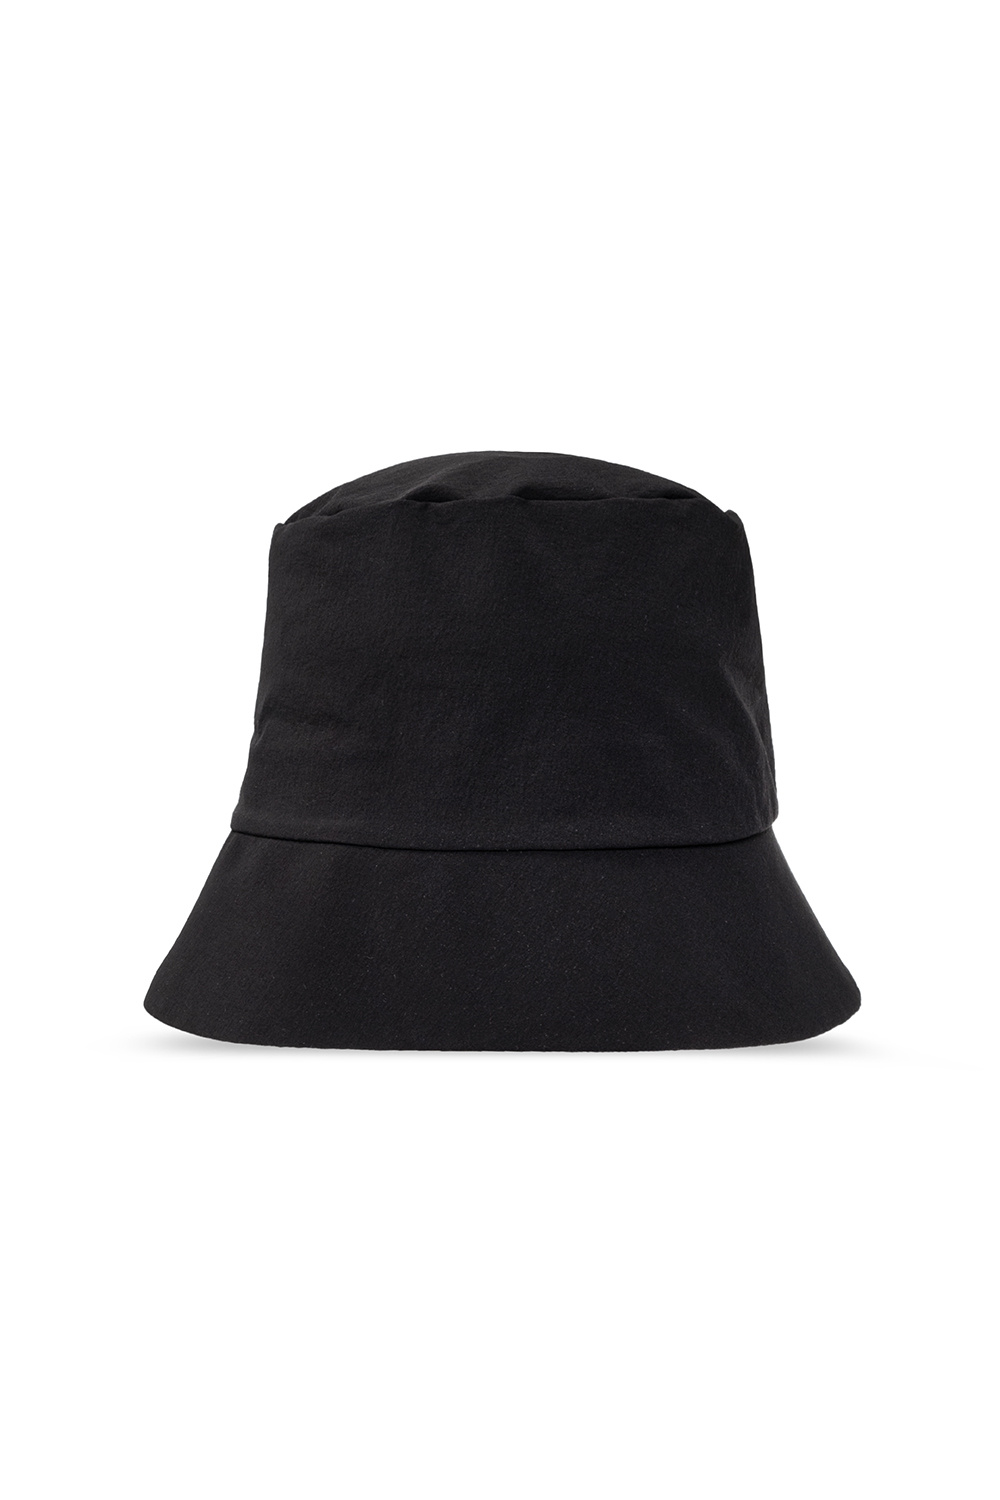 White Mountaineering Bucket ami hat with logo